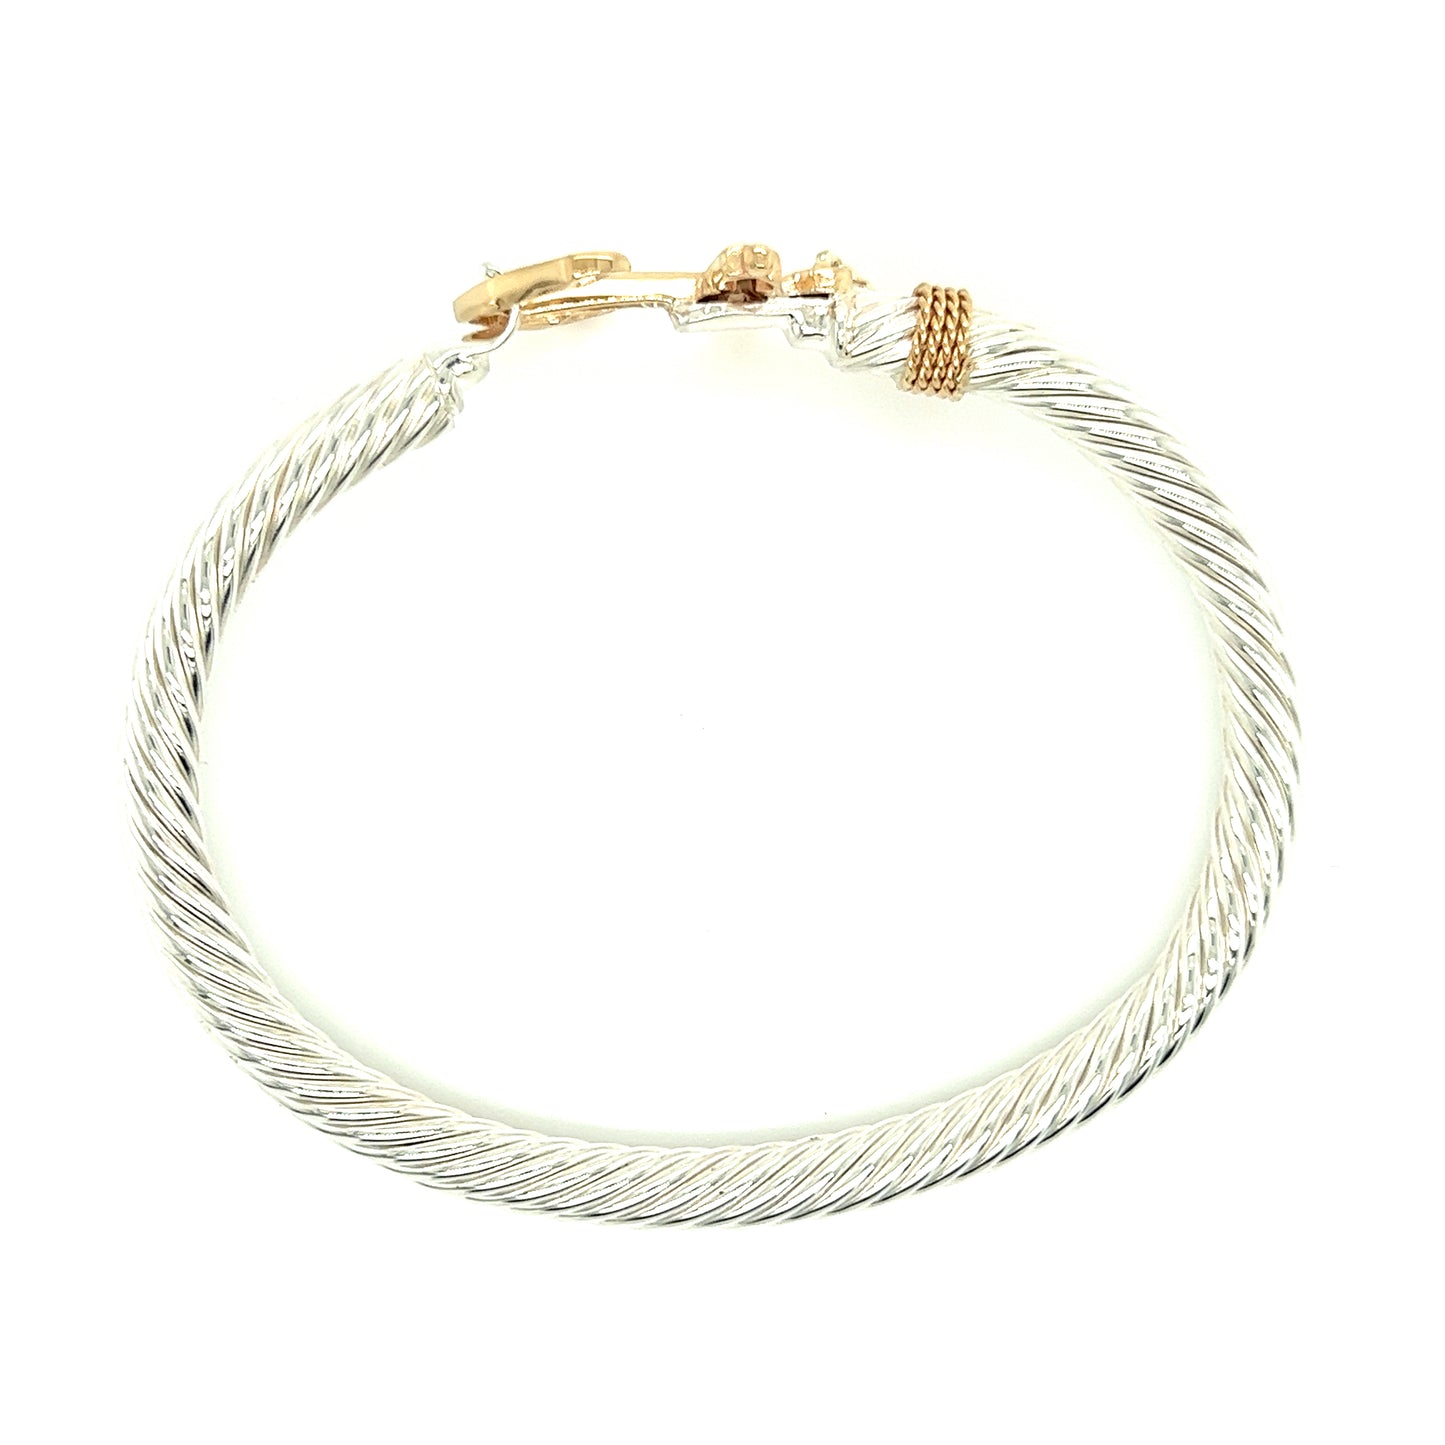 Twisted Cable 5mm Bangle Bracelet with 14K Yellow Gold Anchor and Wrap in Sterling Silver Top View